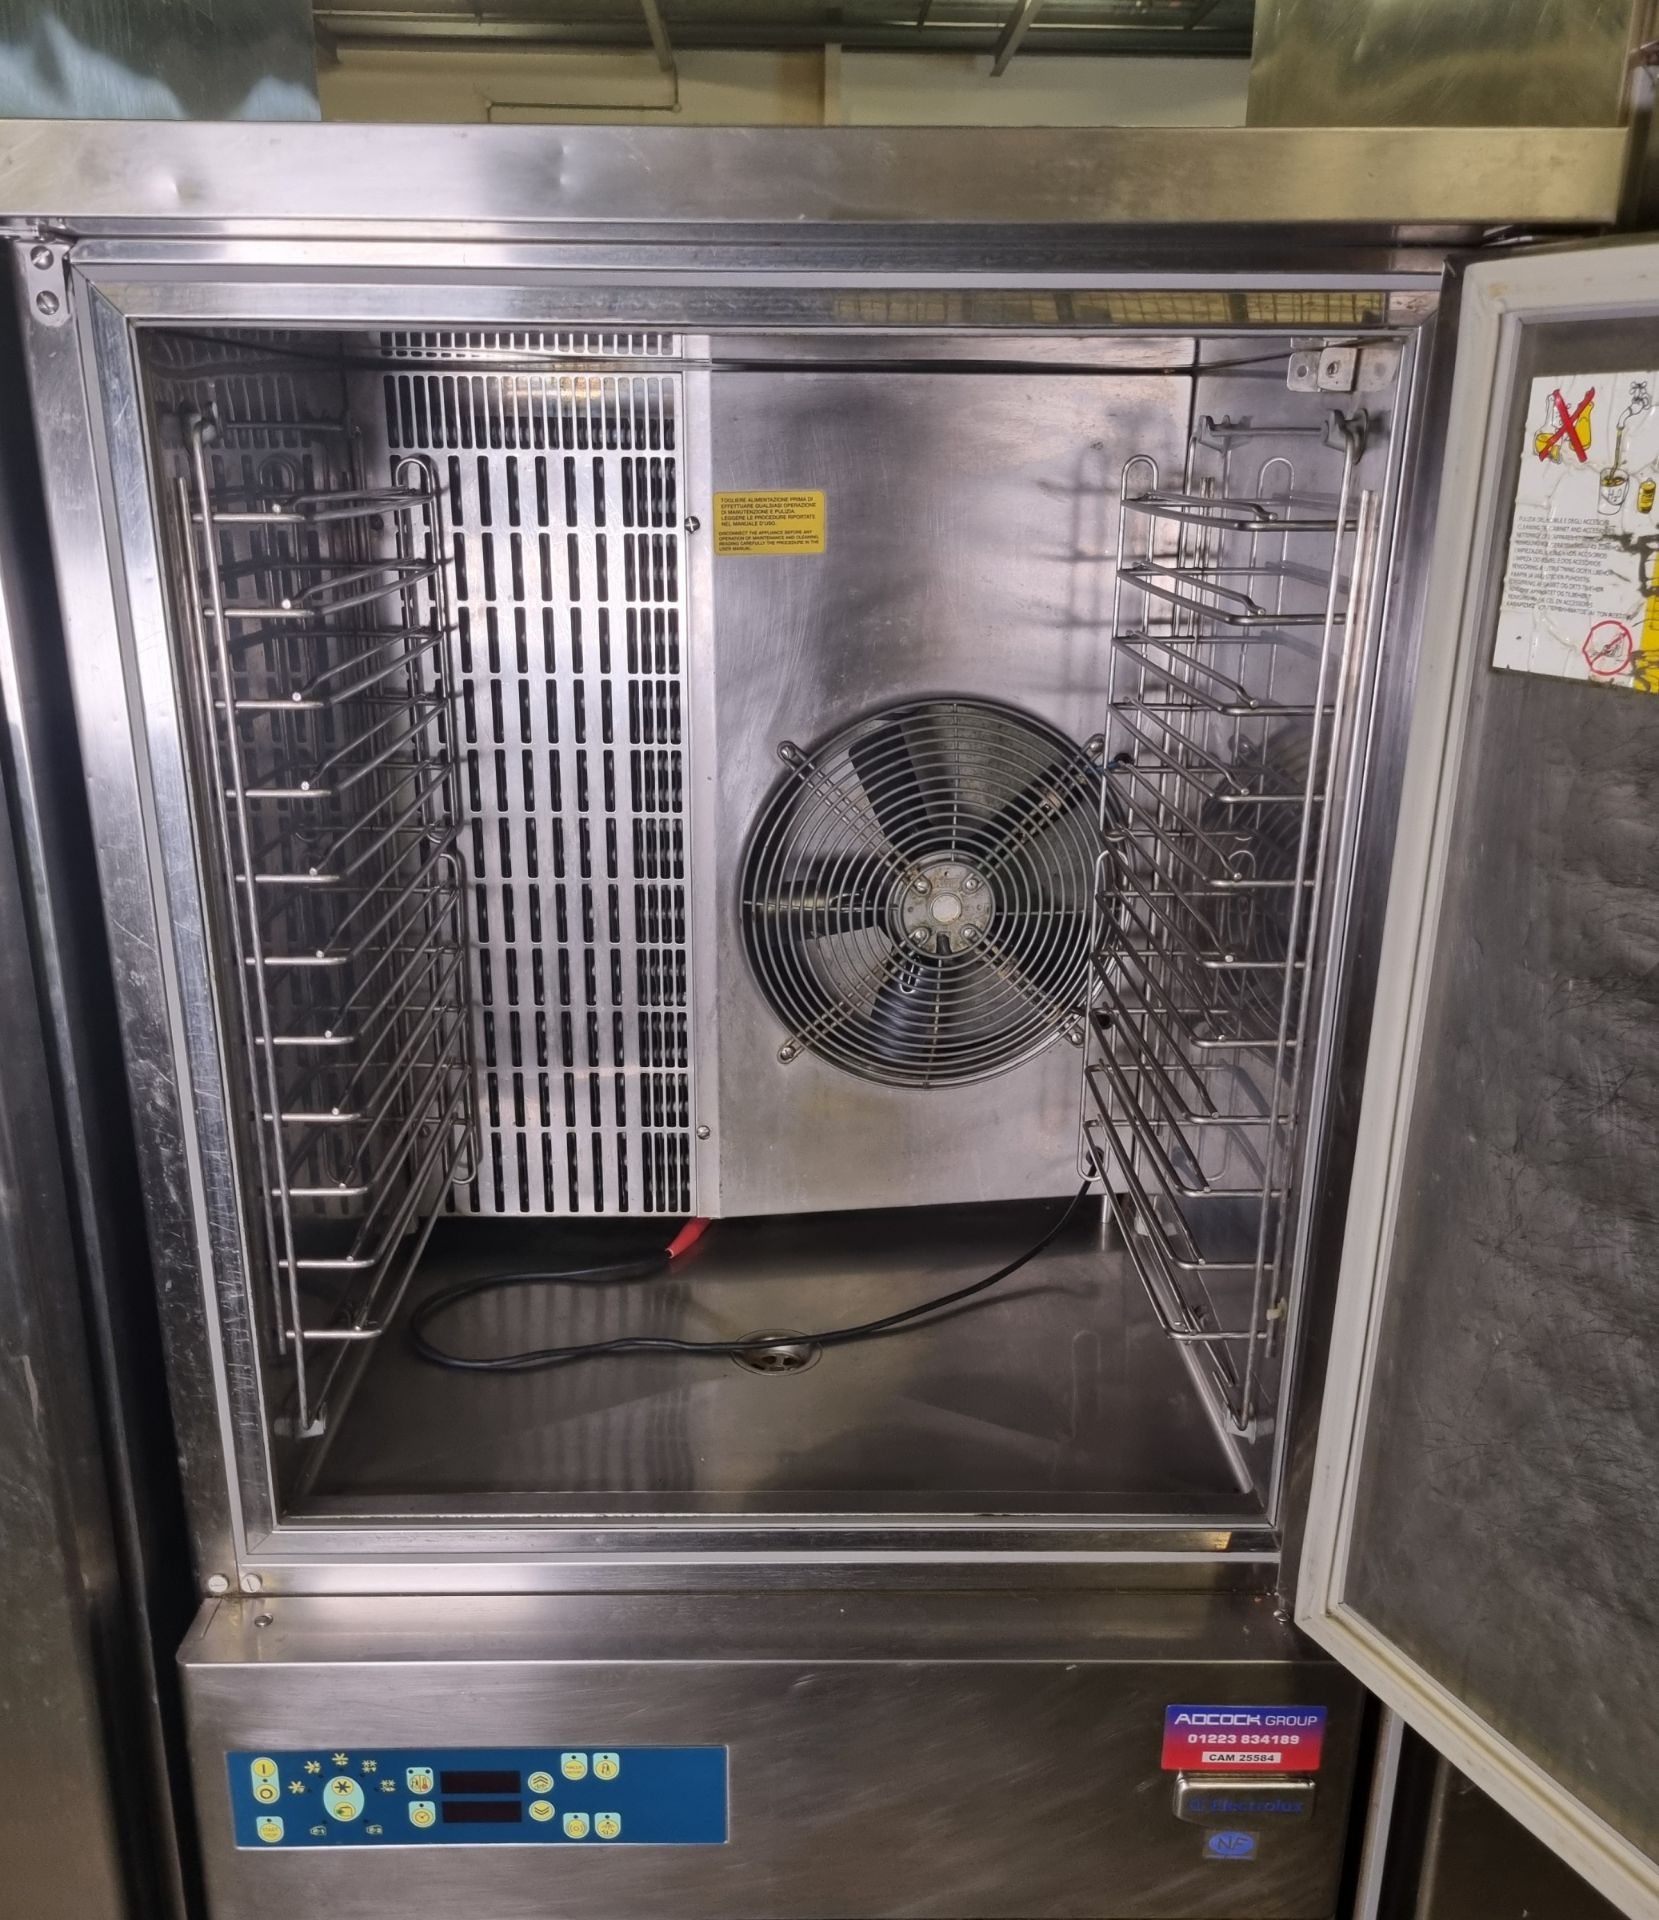 Electrolux RBC101 stainless steel single door blast chiller - W 760 x D 760 x H 1650mm - Image 4 of 5